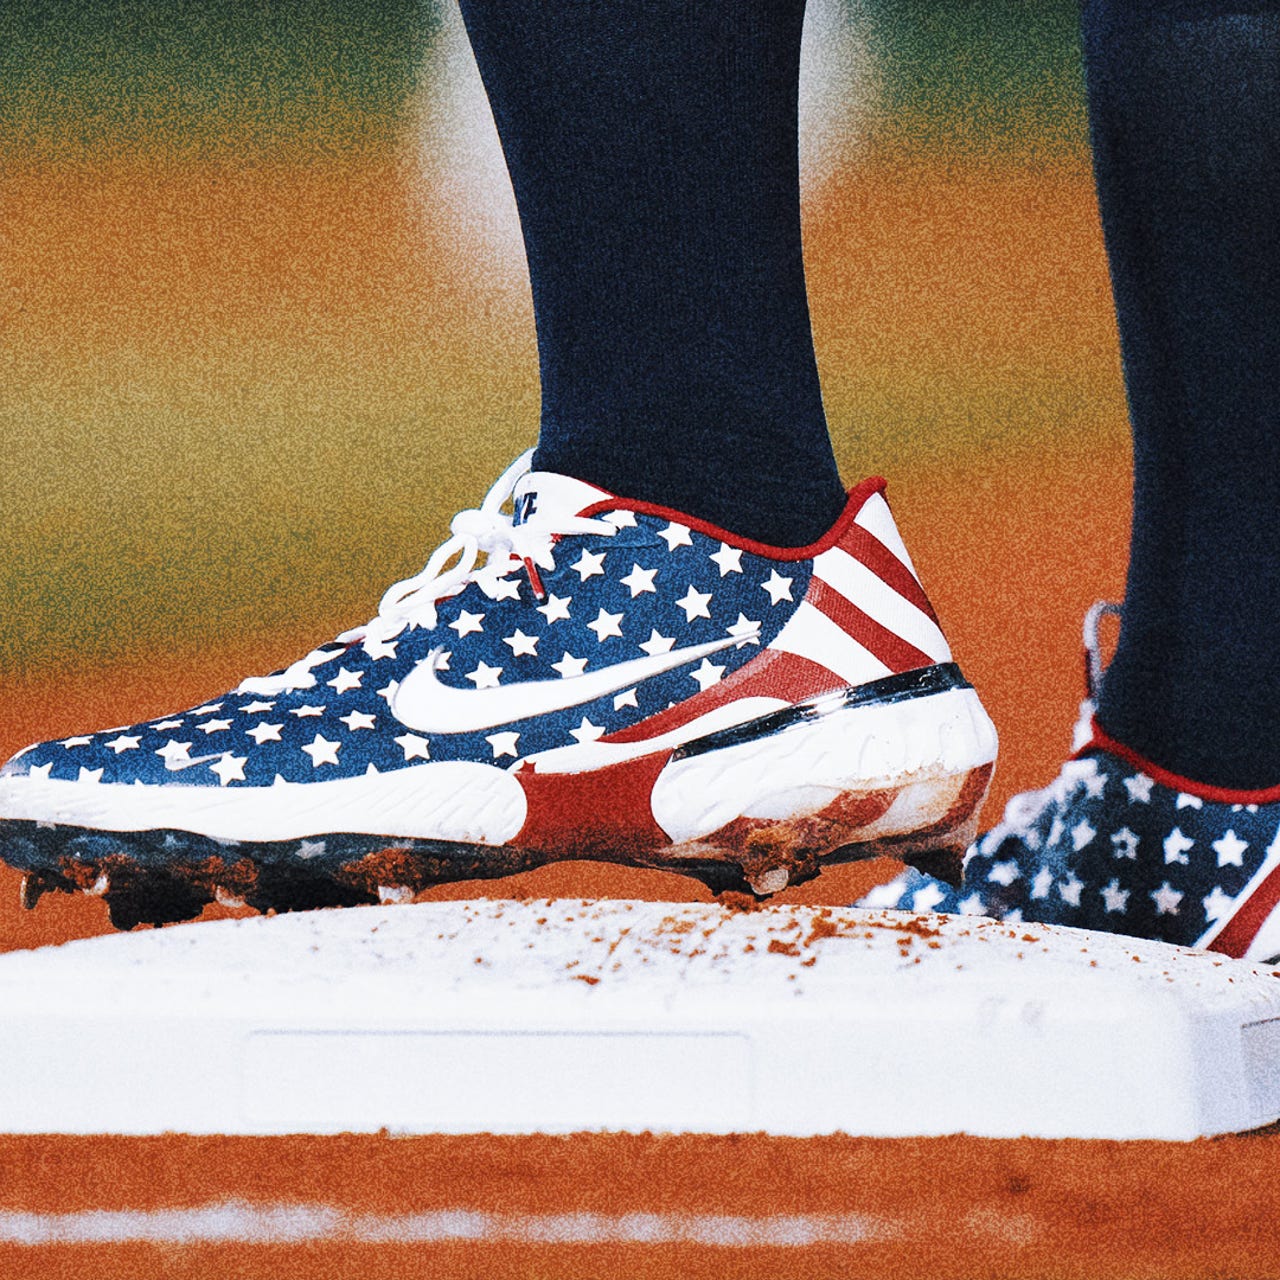 A Cubs minor leaguer may not make World Series, but his shoes have